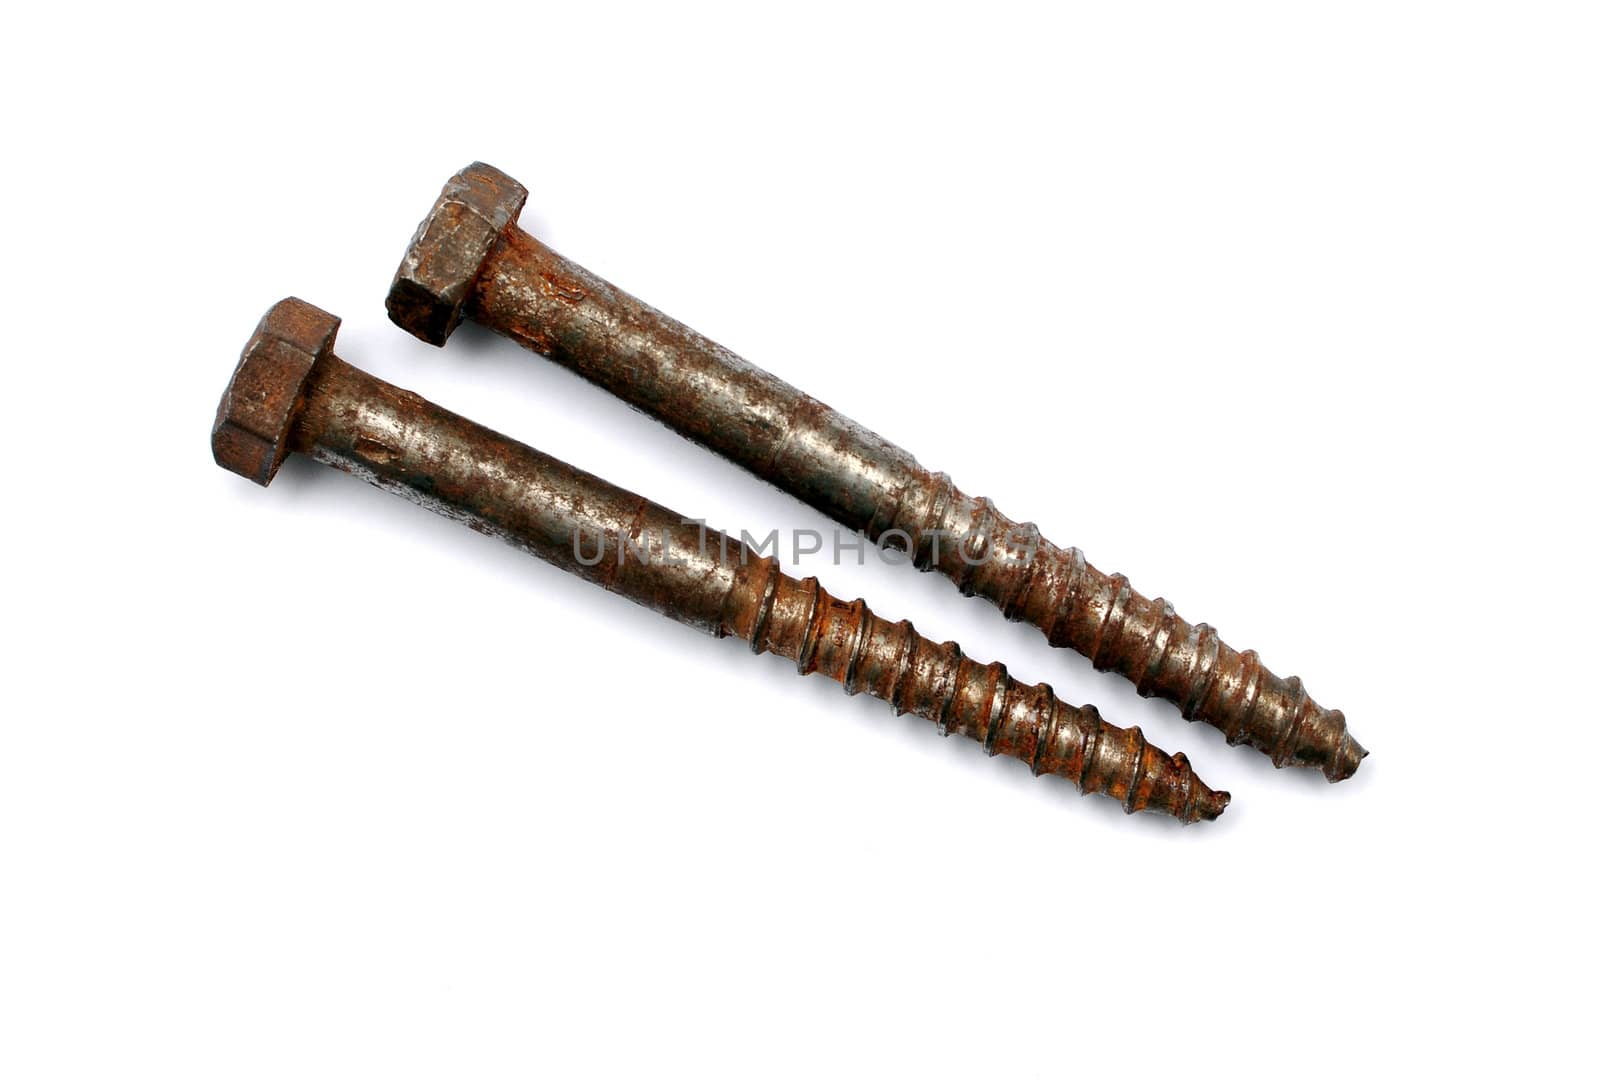 Old rusty screw heads isolated on white background